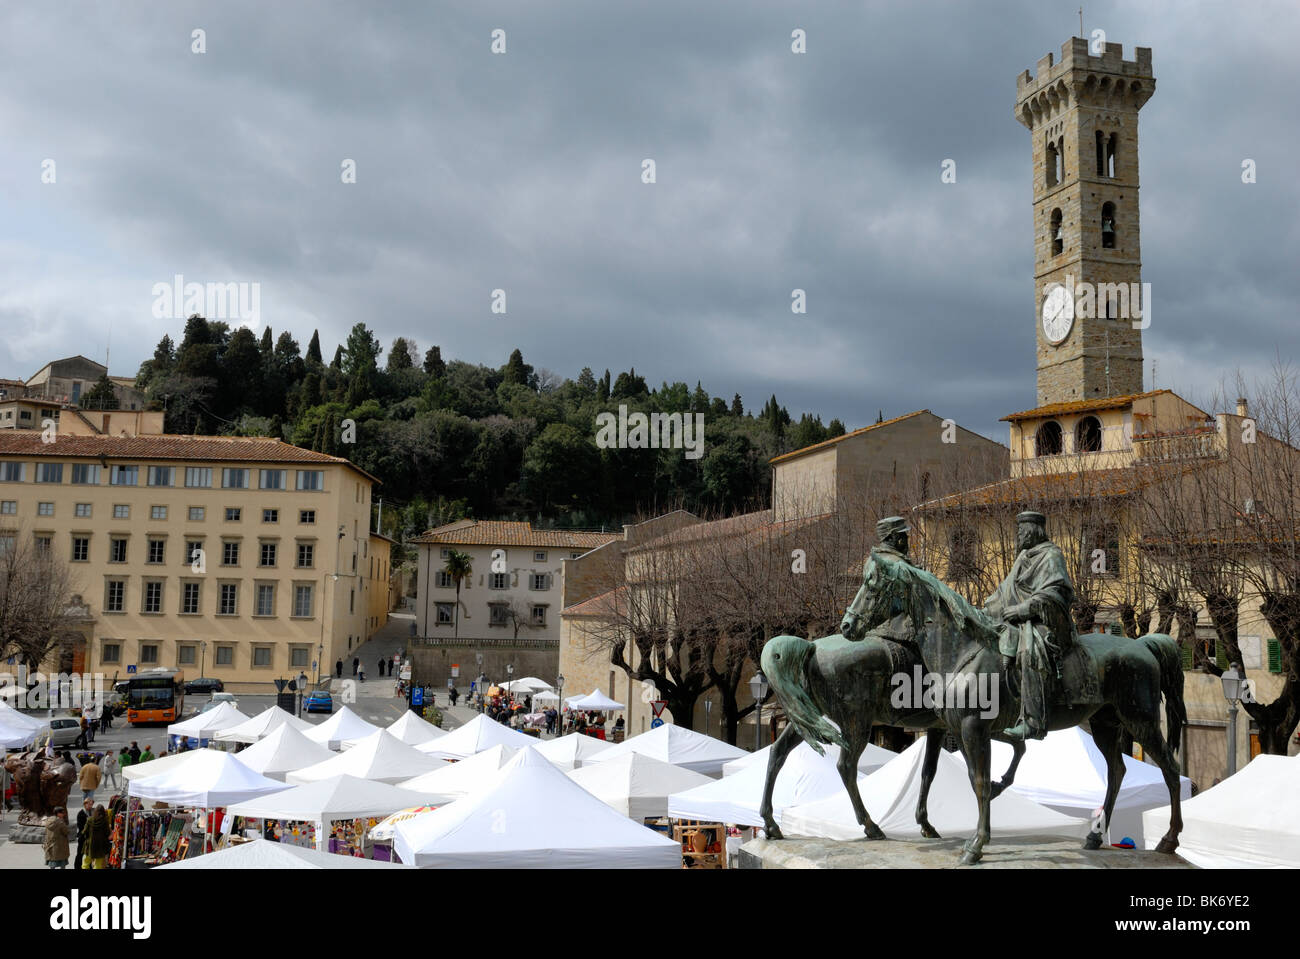 The Sunday market at the heart of the ancient Etruscan town of Fiesole. 'Incontro di Teano', 'Meeting at Teano' is the name of.. Stock Photo